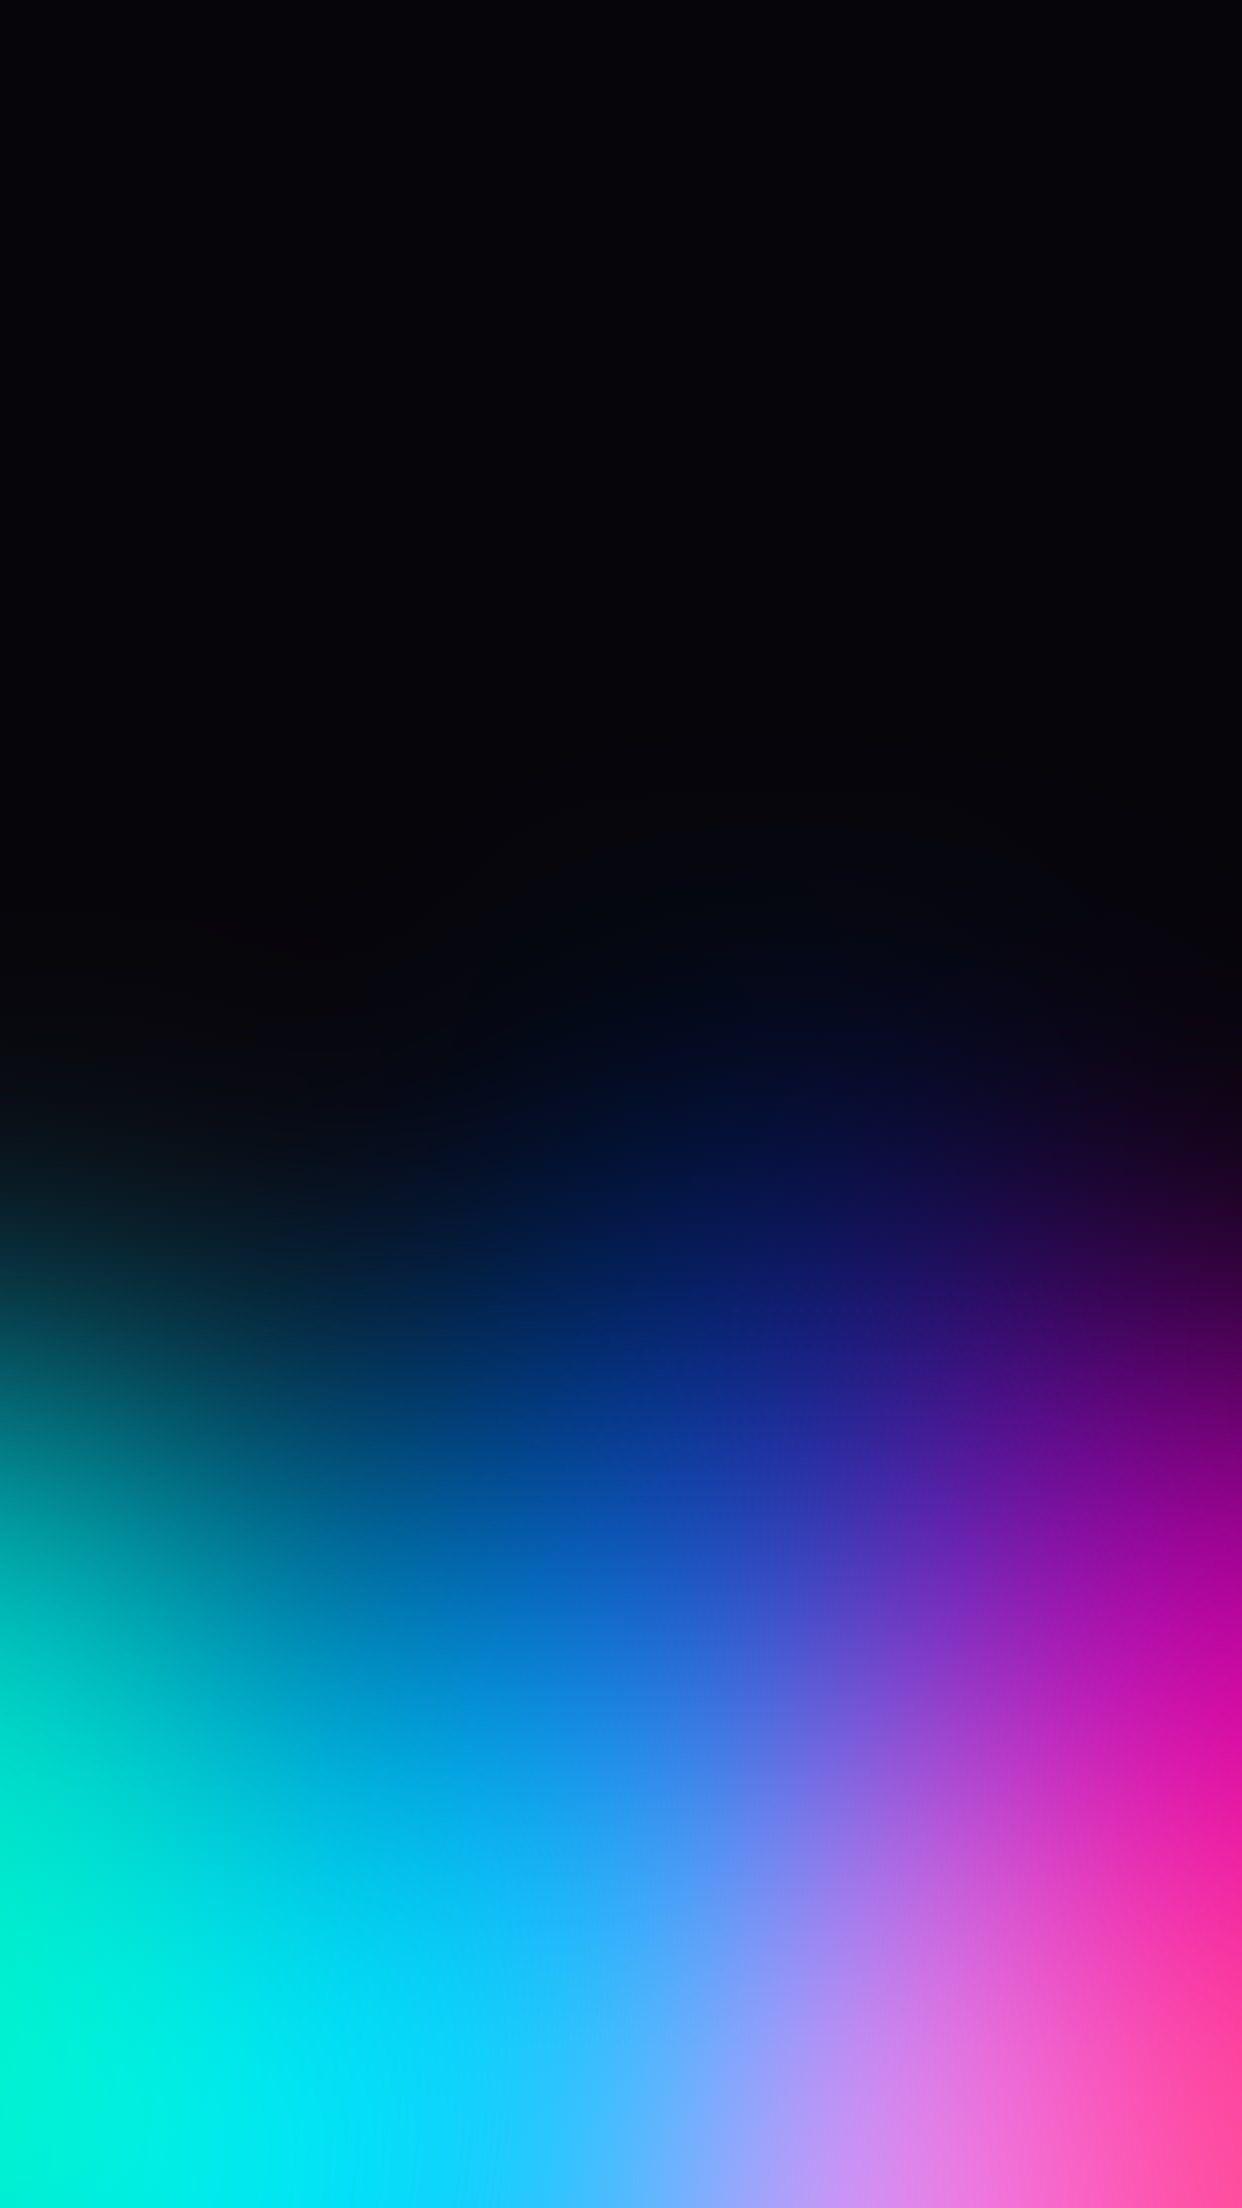 Beautiful gradient, hides the notch!. Android wallpaper, iPhone